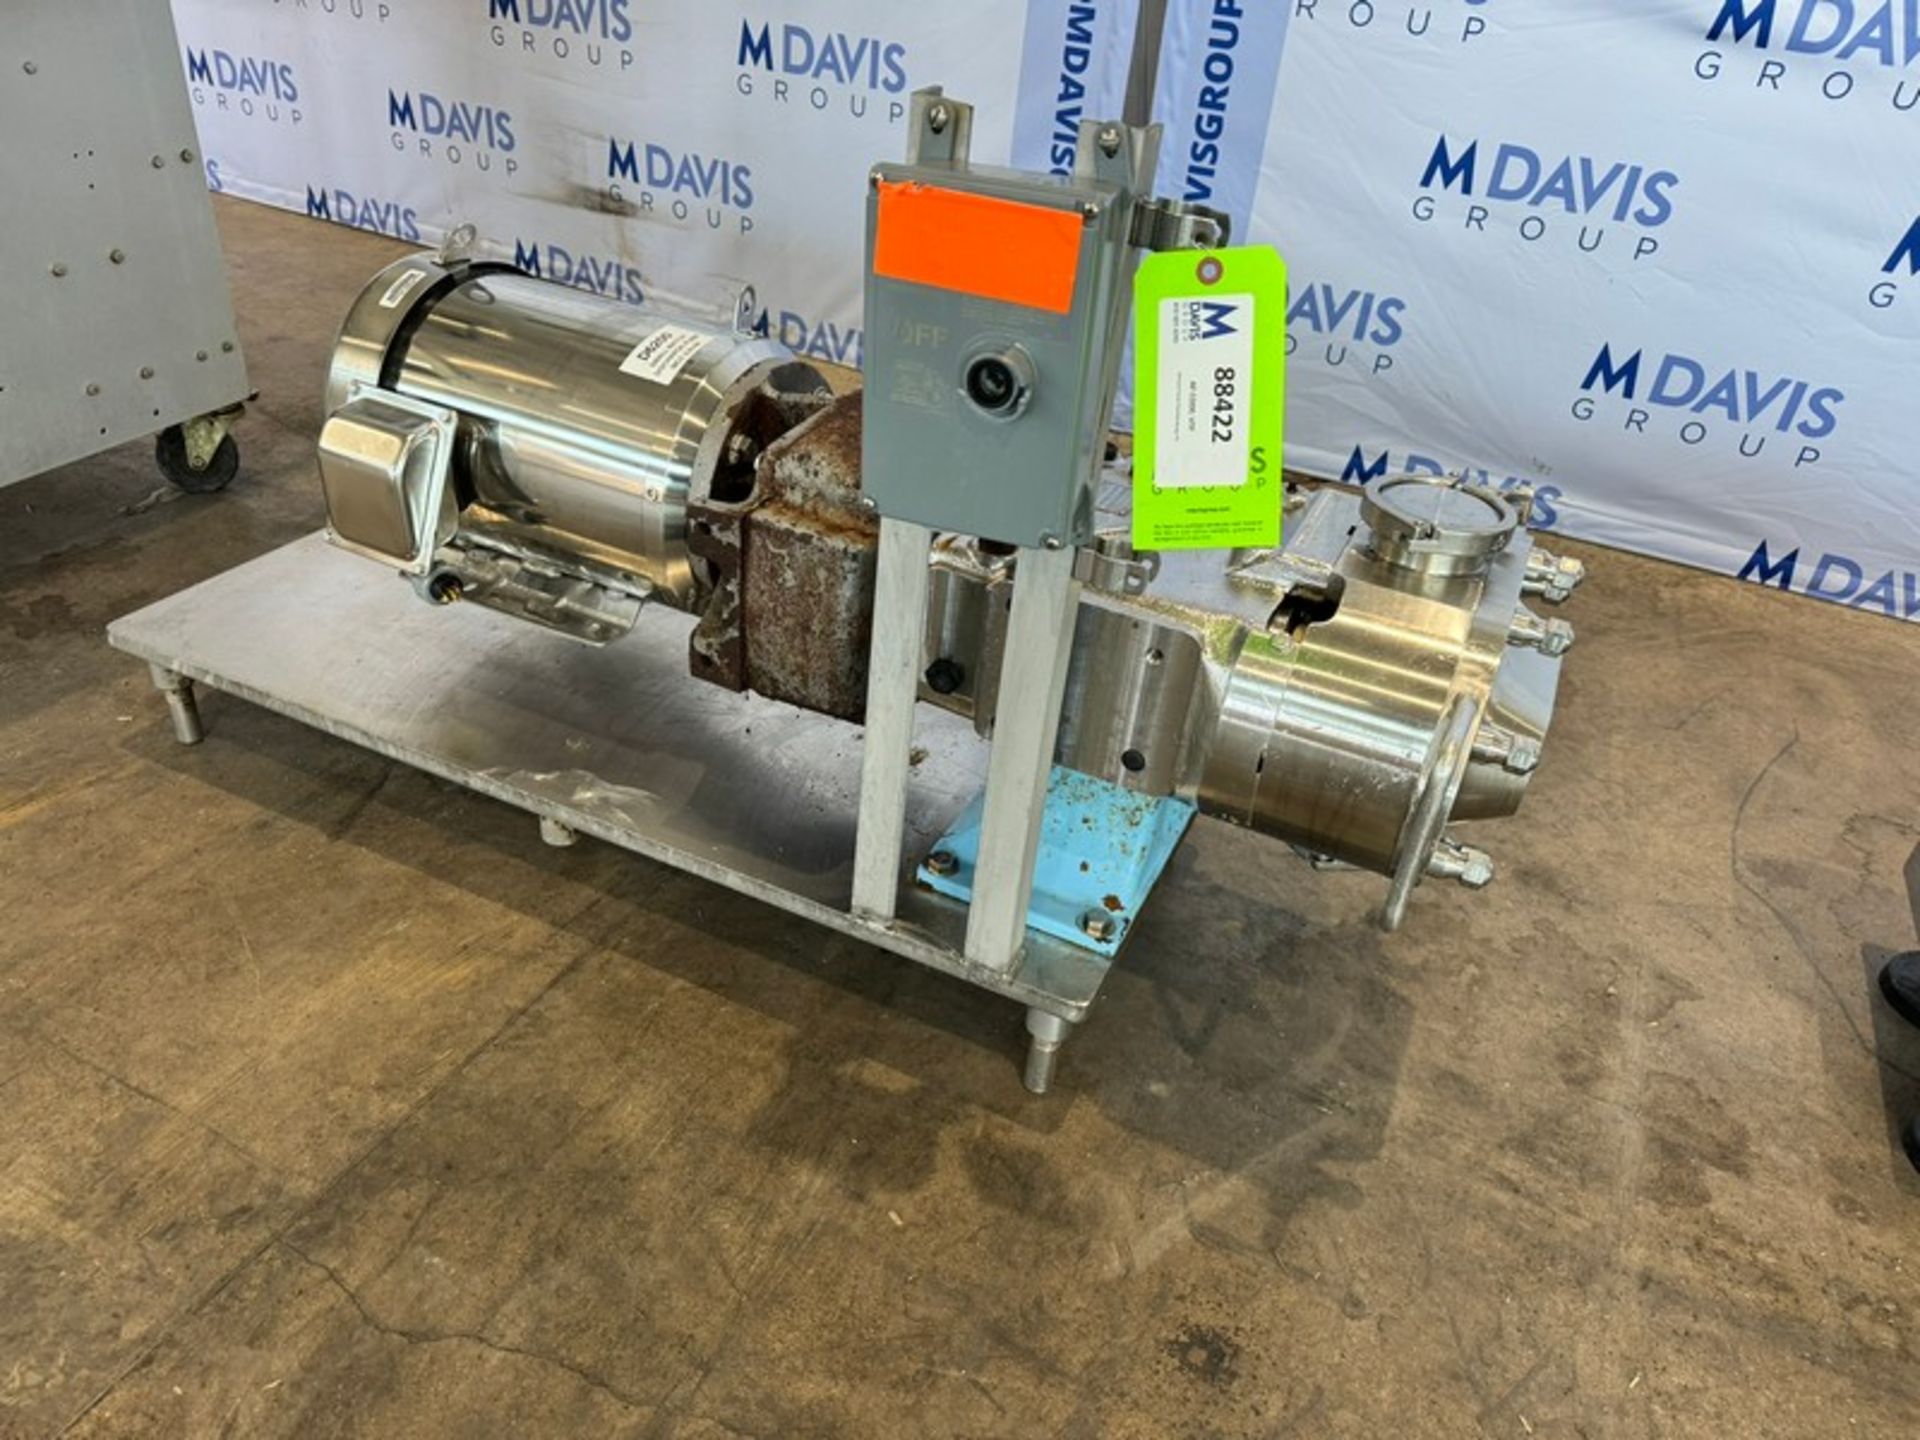 Waukesha Cherry-Burrell 10 hp Positive Displacement Pump, M/N 130U2, S/N 34773 03, with Sterling S/S